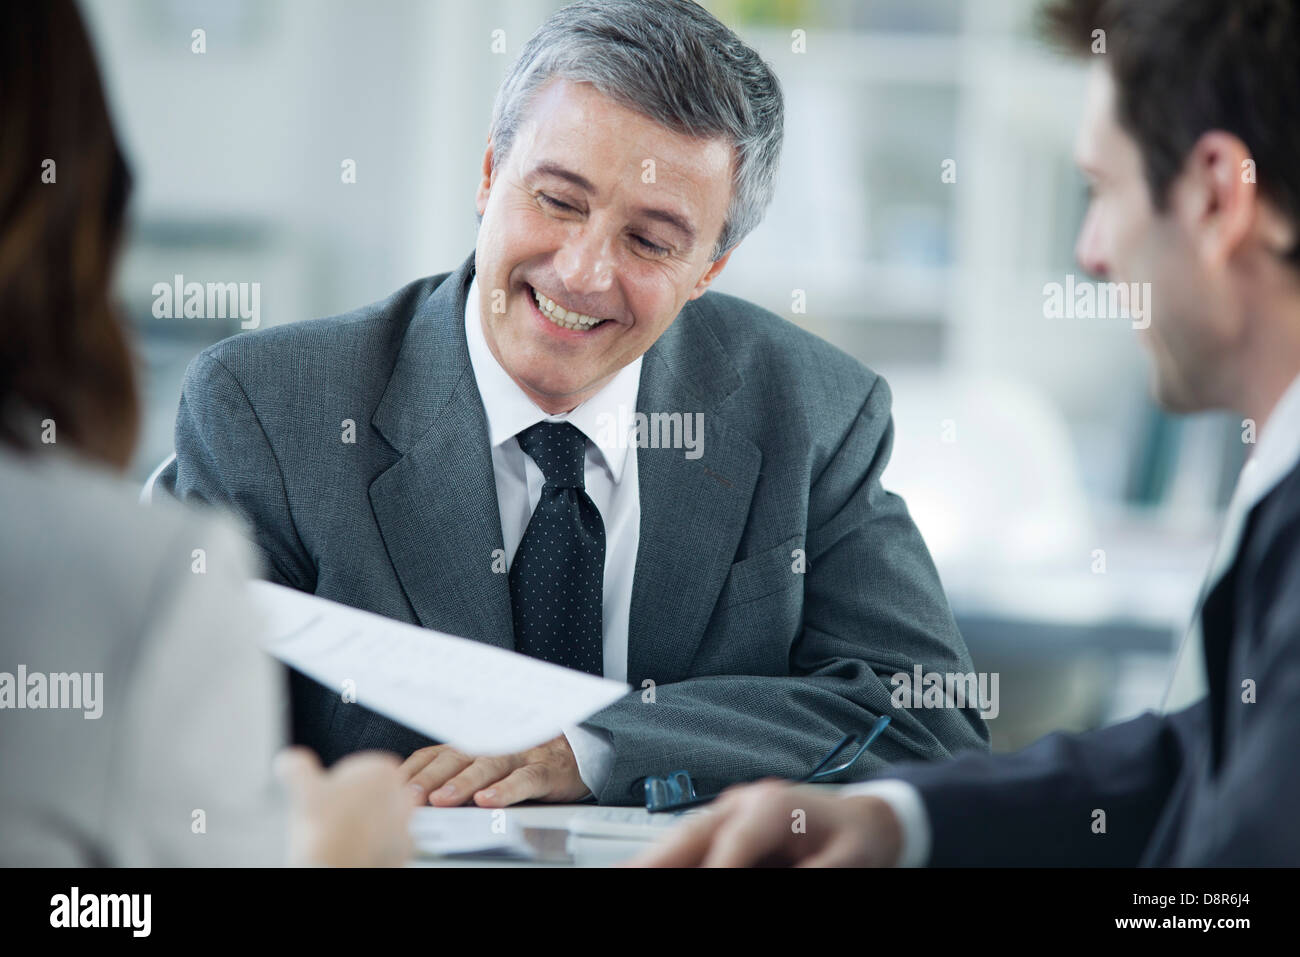 Businessman smiling in meeting with colleagues Stock Photo